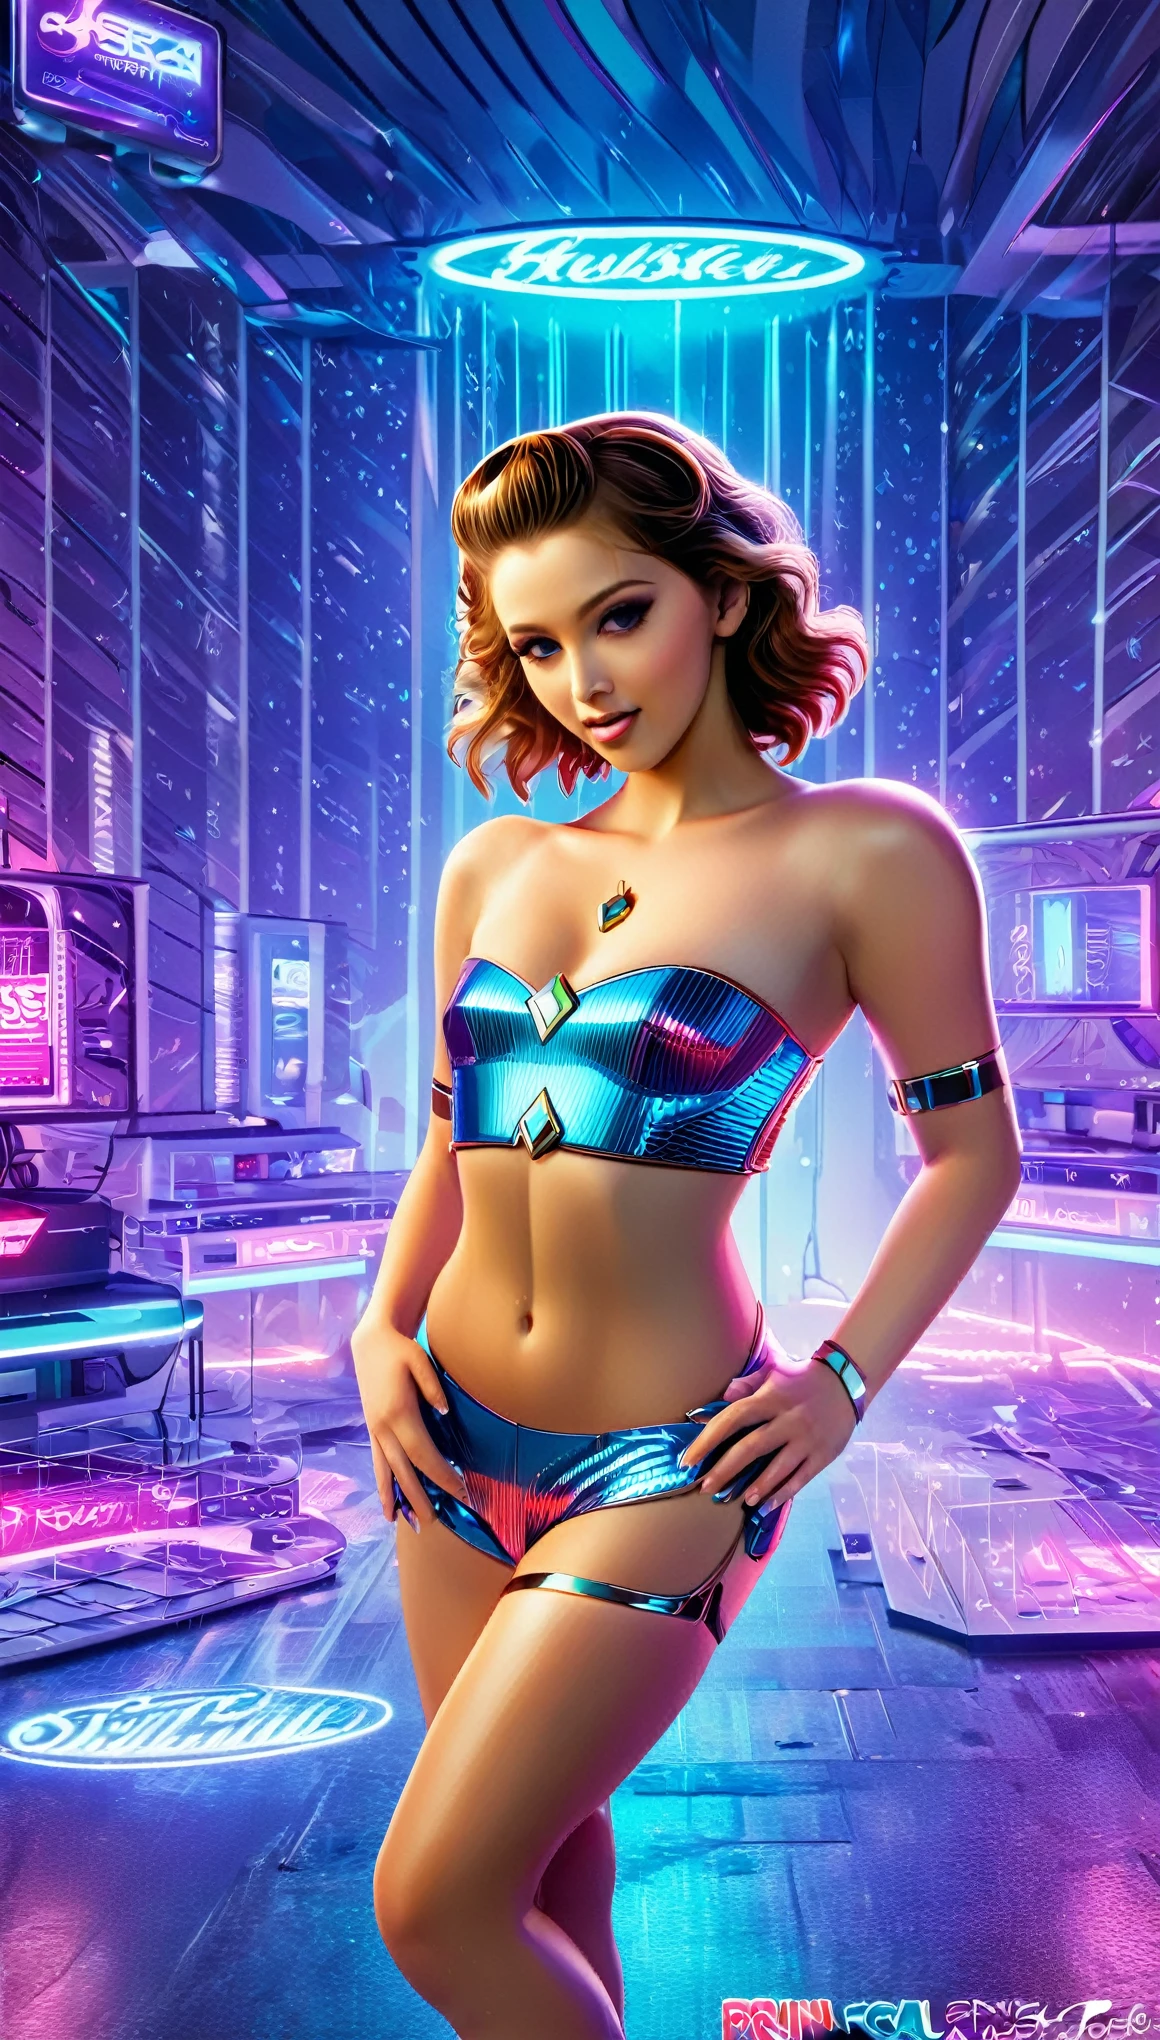 Generate a hyperrealistic image capturing the essence of a futuristic pin-up girl, seamlessly blending classic 1950s charm with cutting-edge technology. Envision her in a sleek, metallic environment adorned with holographic elements.. Ultra realistic, vibrant colors, 16k